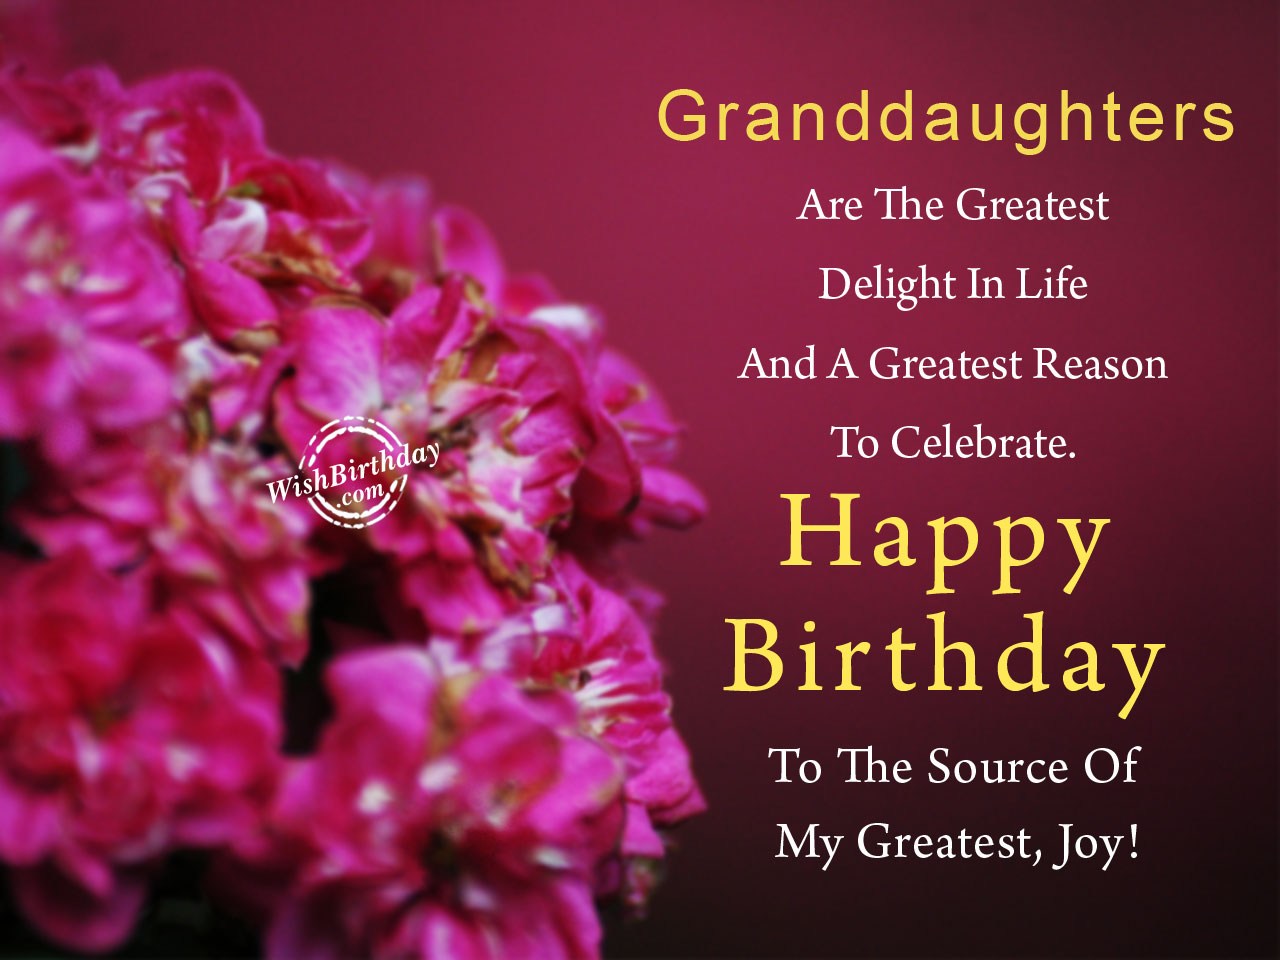 Birthday Wishes For My Granddaughter - Birthday Ideas